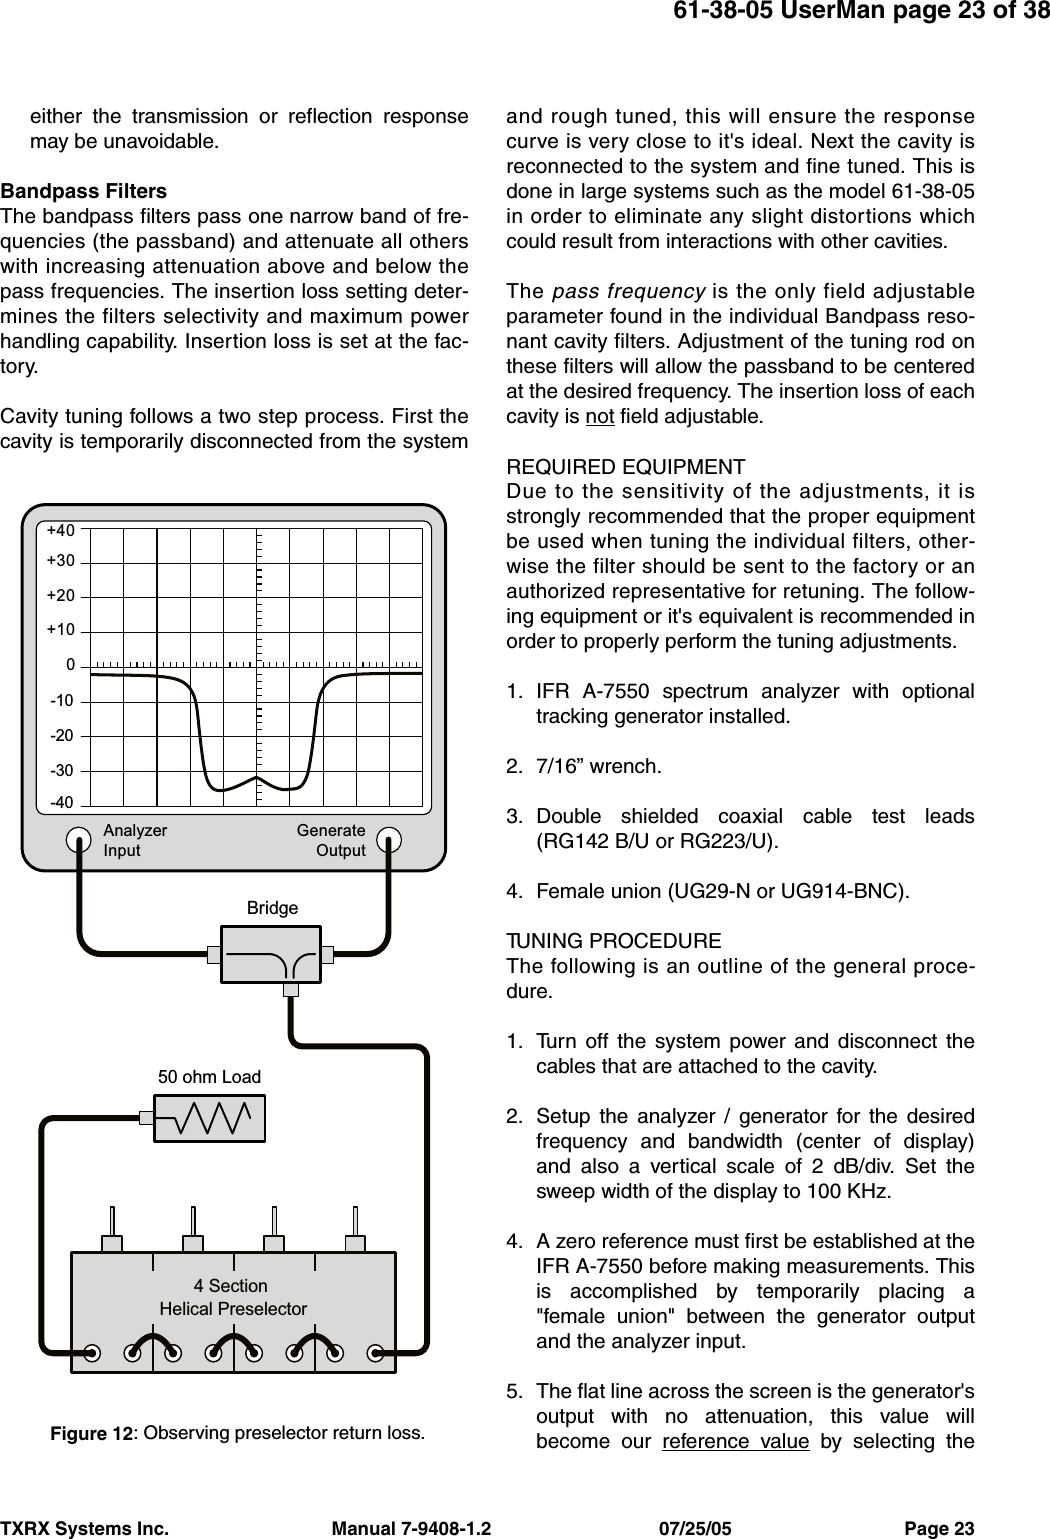 TXRX Systems Inc.                                Manual 7-9408-1.2                                 07/25/05                                  Page 2361-38-05 UserMan page 23 of 38either the transmission or reflection responsemay be unavoidable.Bandpass FiltersThe bandpass filters pass one narrow band of fre-quencies (the passband) and attenuate all otherswith increasing attenuation above and below thepass frequencies. The insertion loss setting deter-mines the filters selectivity and maximum powerhandling capability. Insertion loss is set at the fac-tory.Cavity tuning follows a two step process. First thecavity is temporarily disconnected from the systemand rough tuned, this will ensure the responsecurve is very close to it&apos;s ideal. Next the cavity isreconnected to the system and fine tuned. This isdone in large systems such as the model 61-38-05in order to eliminate any slight distortions whichcould result from interactions with other cavities.The pass frequency is the only field adjustableparameter found in the individual Bandpass reso-nant cavity filters. Adjustment of the tuning rod onthese filters will allow the passband to be centeredat the desired frequency. The insertion loss of eachcavity is not field adjustable.REQUIRED EQUIPMENTDue to the sensitivity of the adjustments, it isstrongly recommended that the proper equipmentbe used when tuning the individual filters, other-wise the filter should be sent to the factory or anauthorized representative for retuning. The follow-ing equipment or it&apos;s equivalent is recommended inorder to properly perform the tuning adjustments.1. IFR A-7550 spectrum analyzer with optionaltracking generator installed.2. 7/16” wrench.3. Double shielded coaxial cable test leads(RG142 B/U or RG223/U).4. Female union (UG29-N or UG914-BNC).TUNING PROCEDUREThe following is an outline of the general proce-dure.1. Turn off the system power and disconnect thecables that are attached to the cavity. 2. Setup the analyzer / generator for the desiredfrequency and bandwidth (center of display)and also a vertical scale of 2 dB/div. Set thesweep width of the display to 100 KHz.4. A zero reference must first be established at theIFR A-7550 before making measurements. Thisis accomplished by temporarily placing a&quot;female union&quot; between the generator outputand the analyzer input.5. The flat line across the screen is the generator&apos;soutput with no attenuation, this value willbecome our reference value by selecting the4 Section Helical PreselectorAnalyzerInputGenerateOutput+30+40+20+100-10-20-30-40Bridge50 ohm LoadFigure 12: Observing preselector return loss.